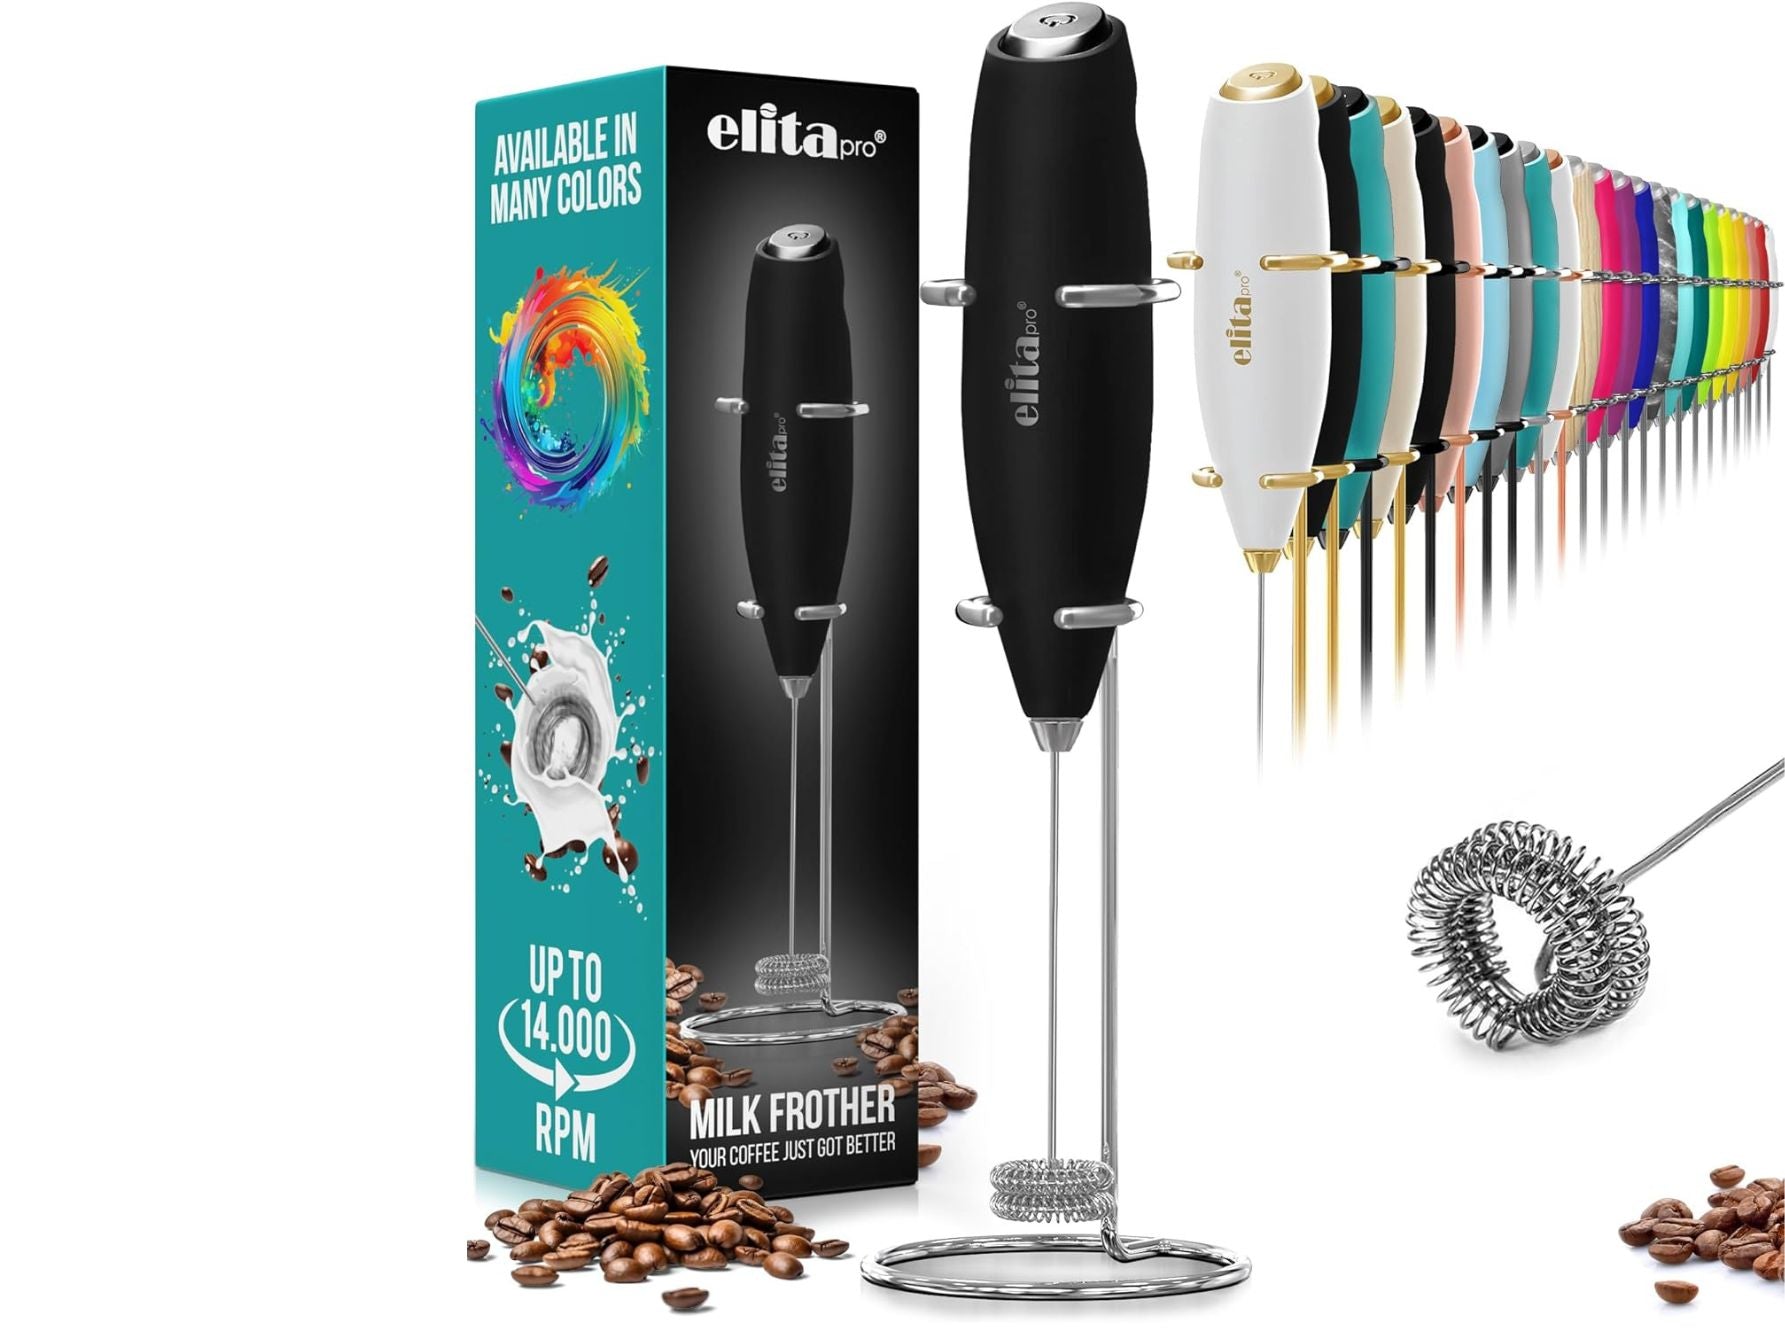 ElitaPro Powerful Milk Frother Wand - Handheld Coffee Frother